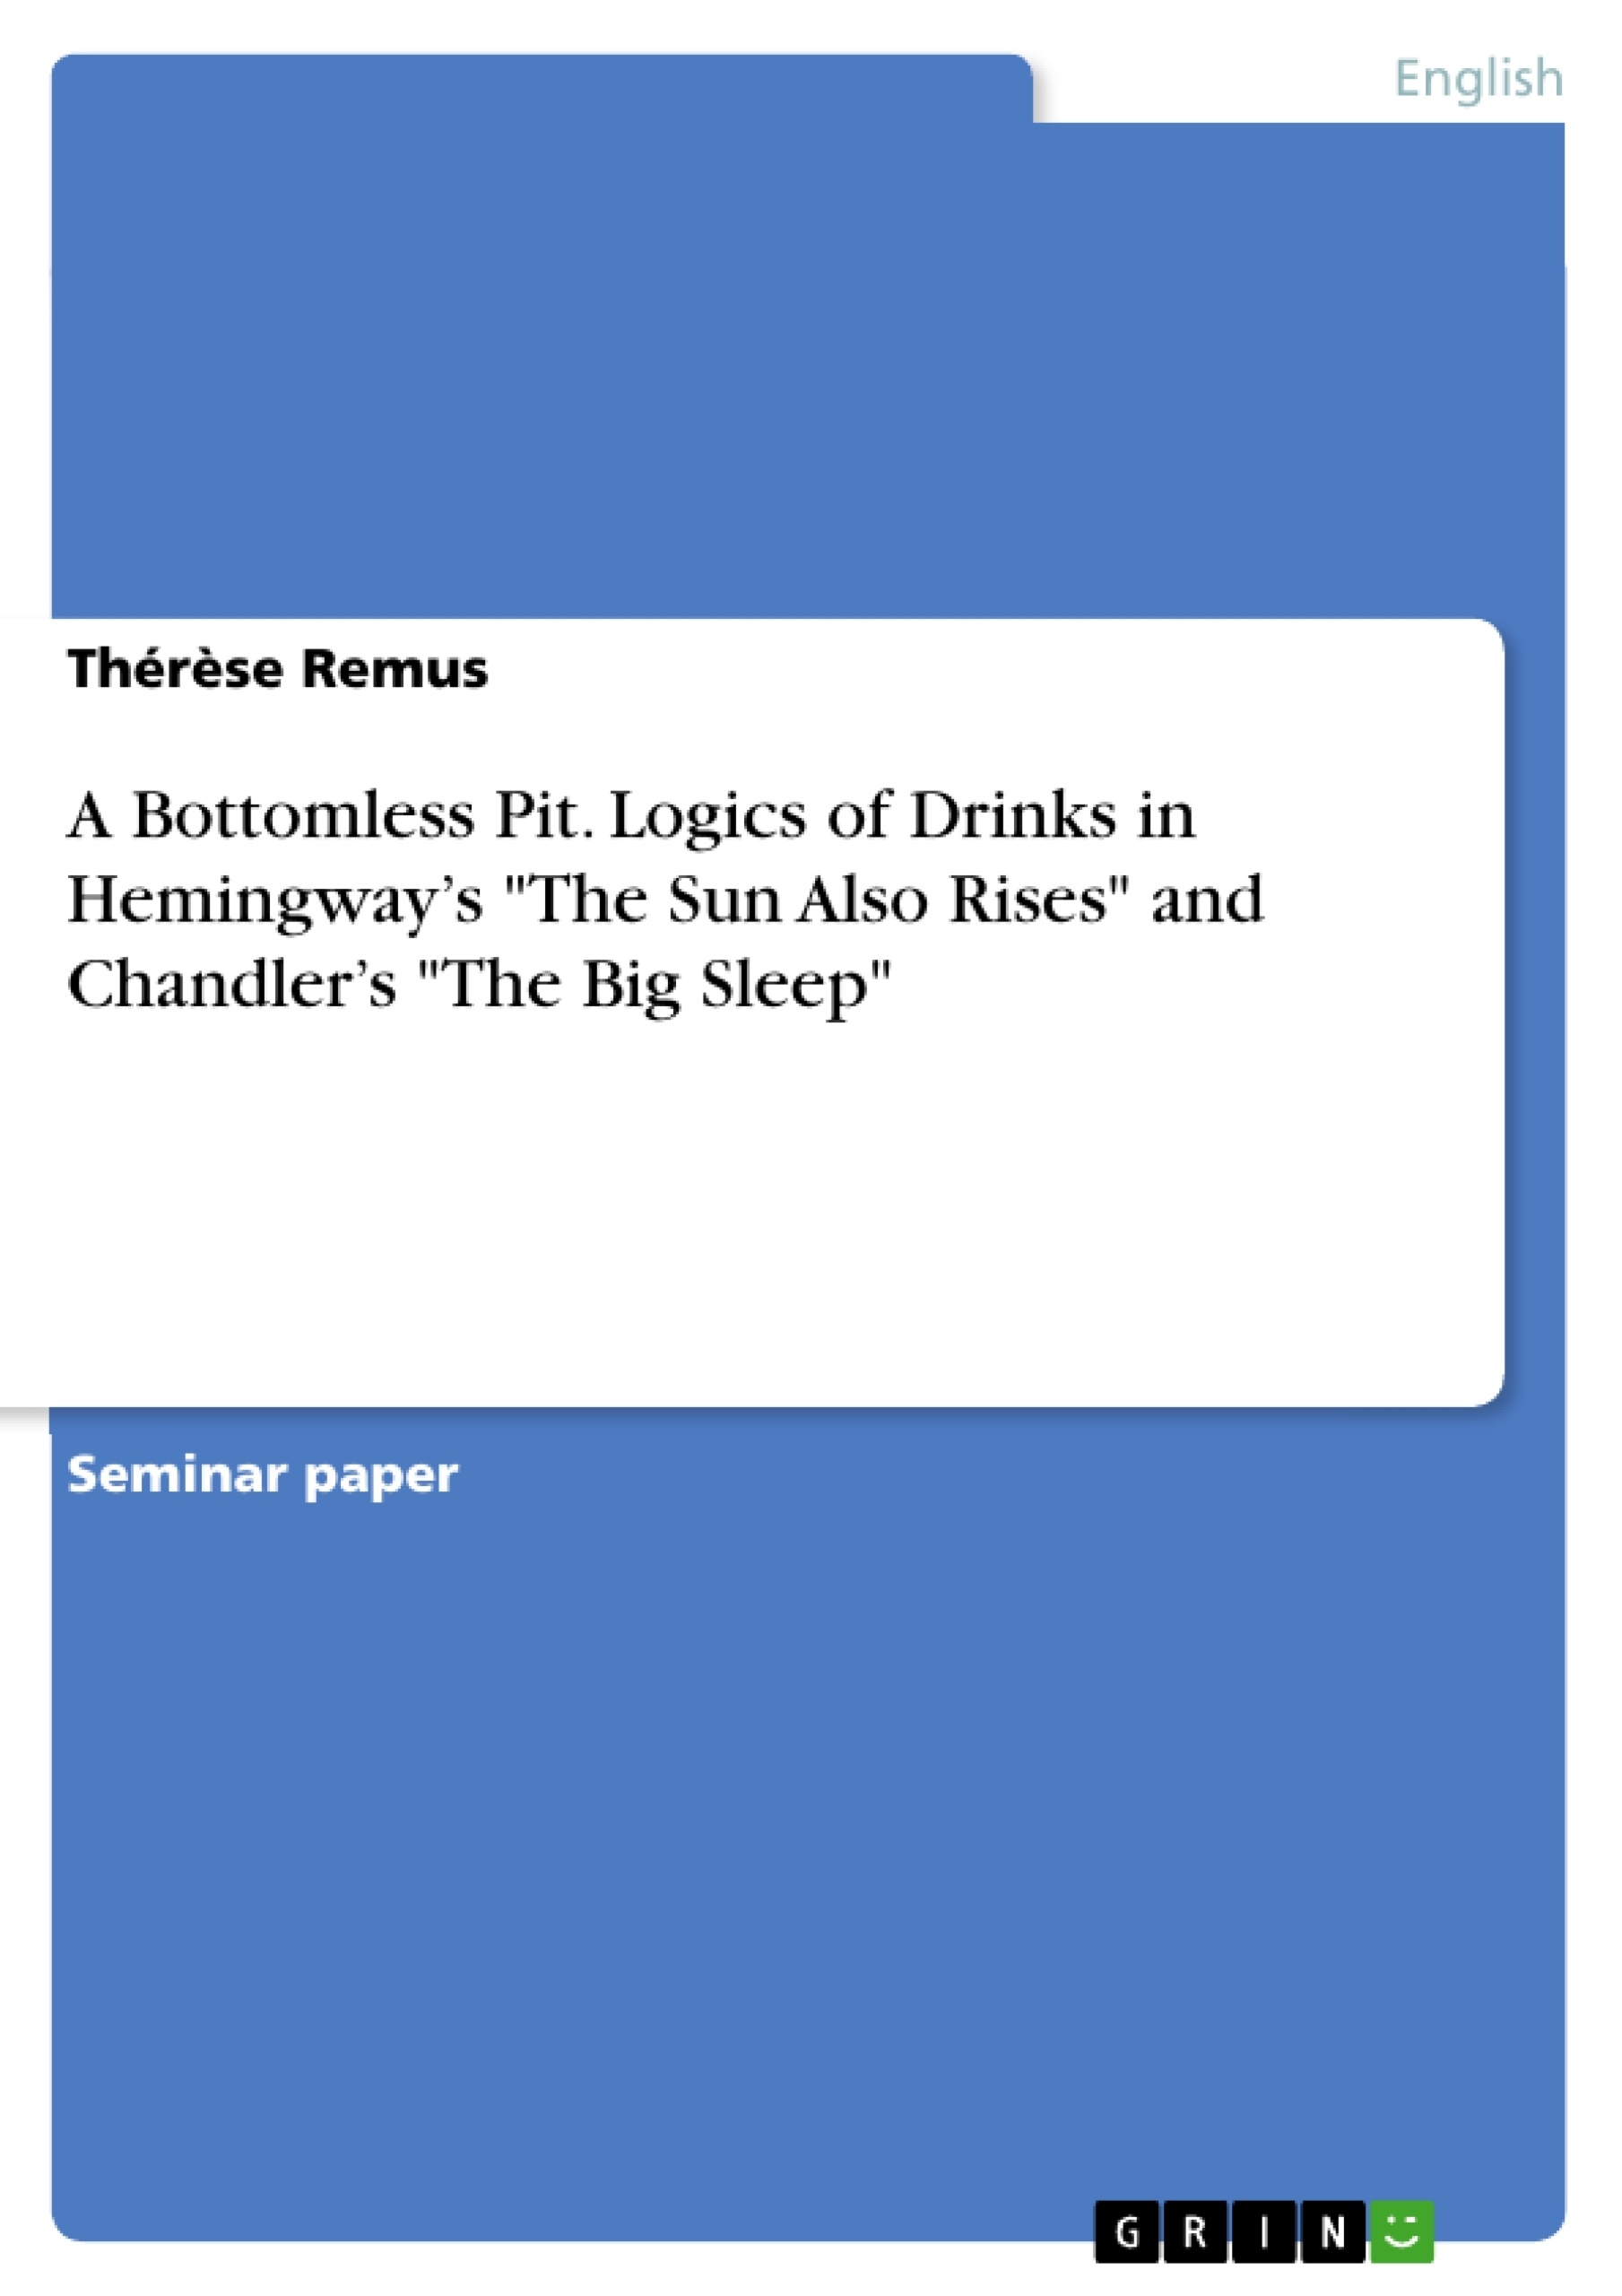 Title: A Bottomless Pit. Logics of Drinks in Hemingway’s "The Sun Also Rises" and Chandler’s "The Big Sleep"